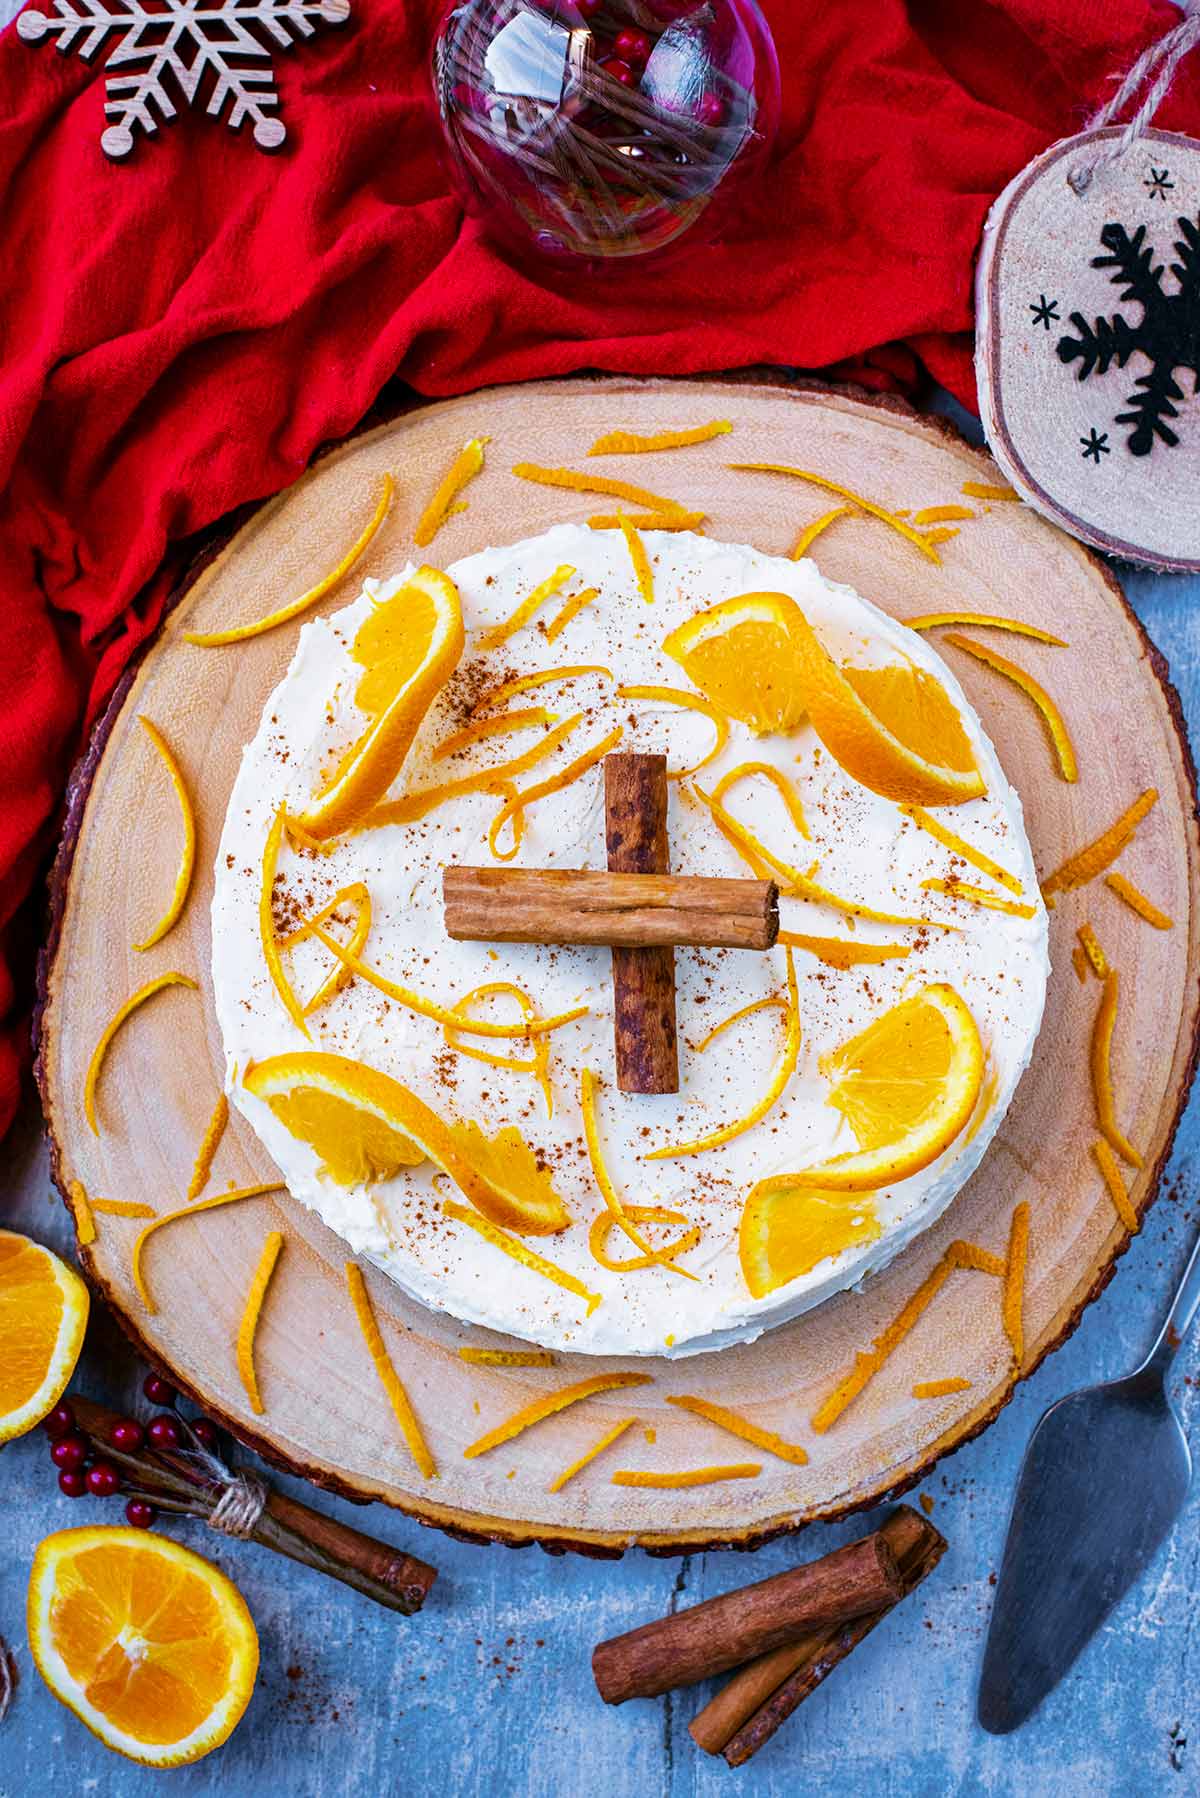 A cheesecake on a wooden board topped with cinnamon sticks and orange slices.